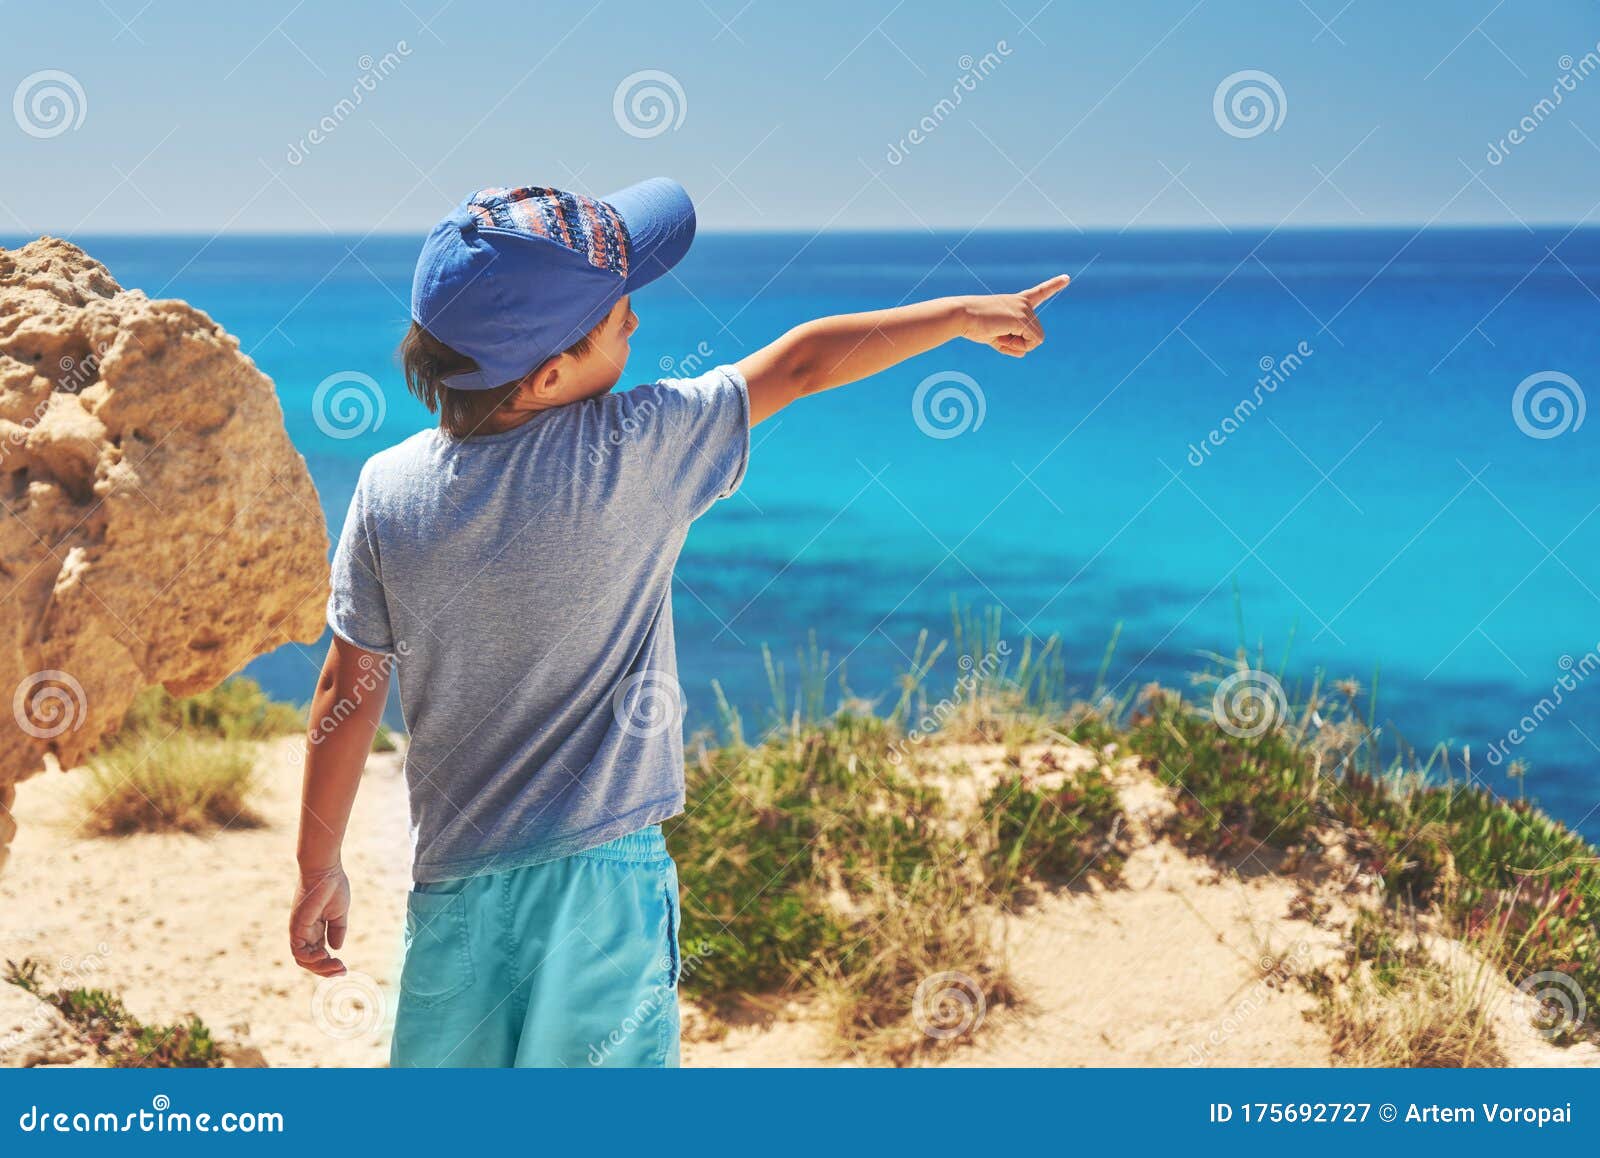 child is looking to the sea being on the picturesque cliffy coast.